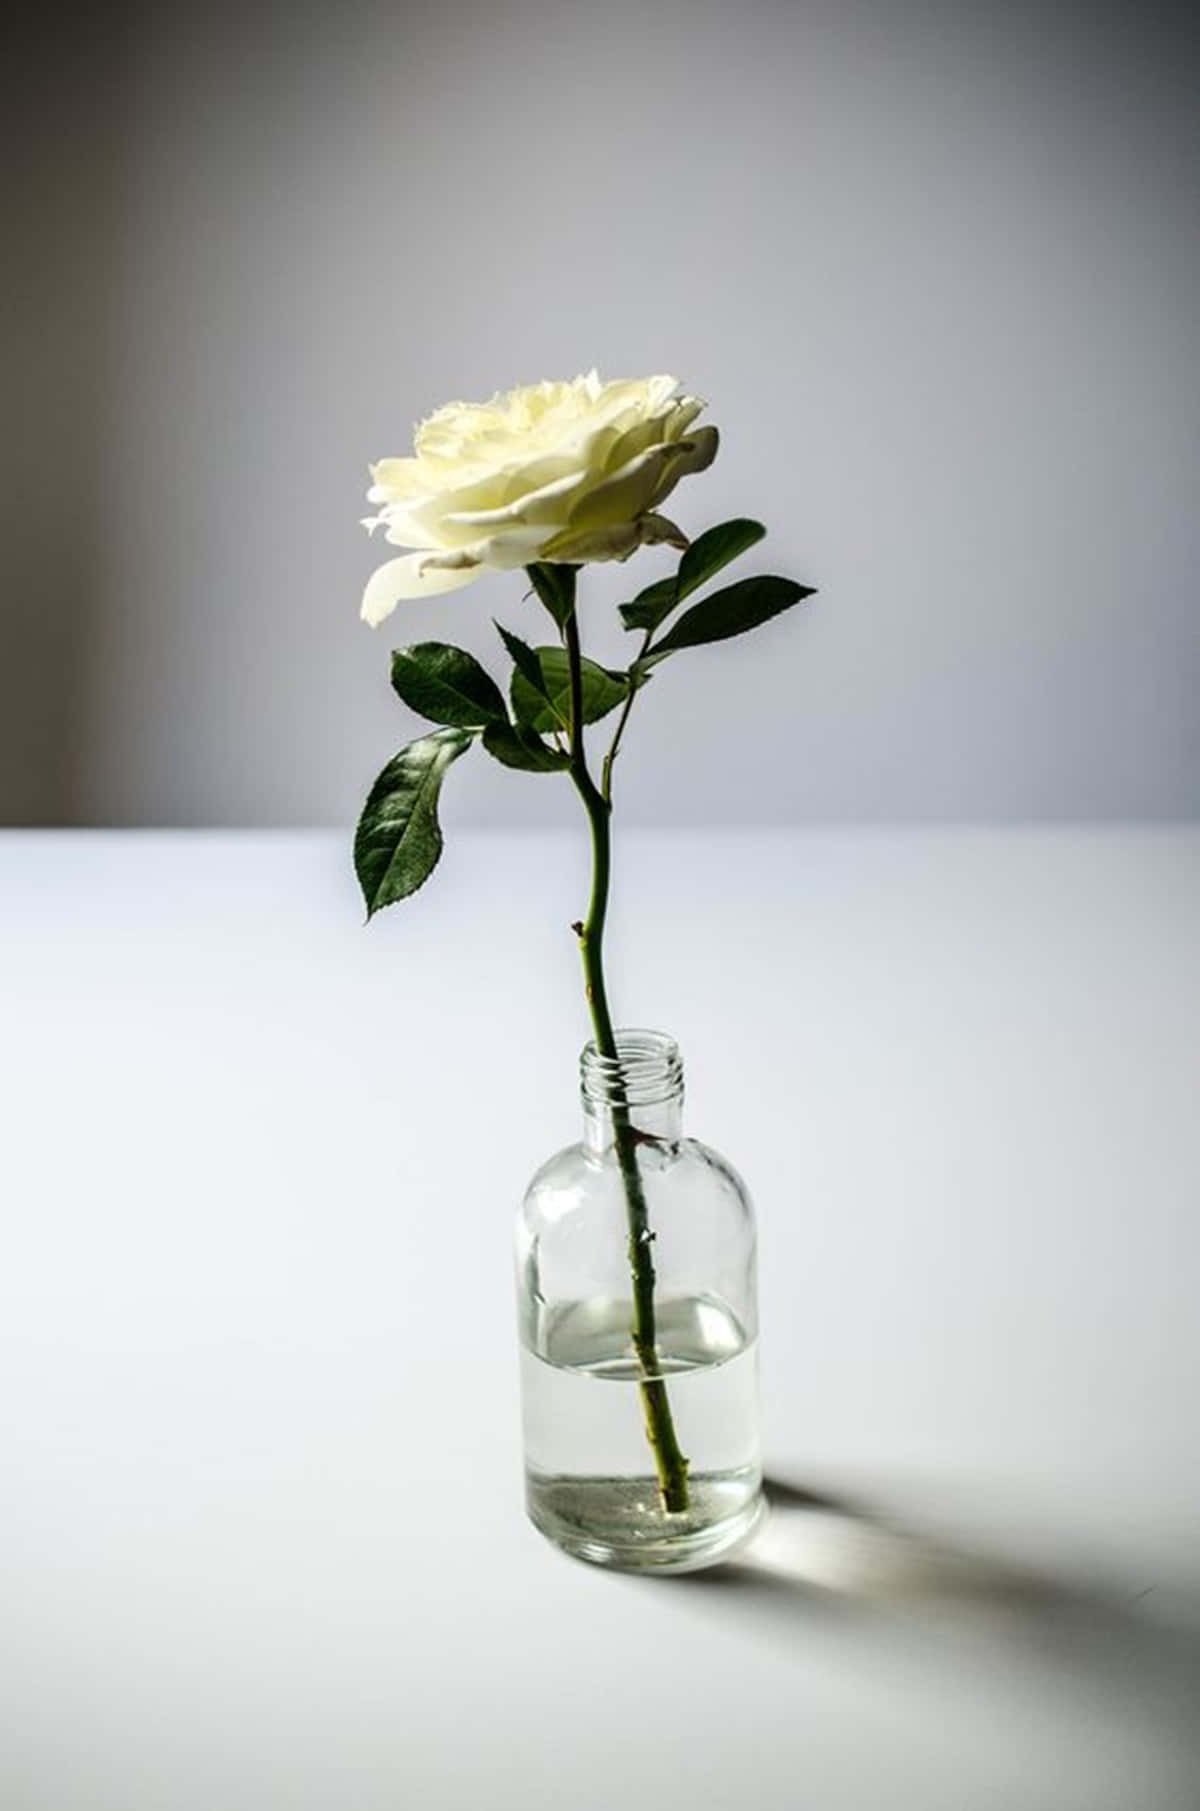 Caption: Elegance in Simplicity - A White Rose in Bloom Wallpaper